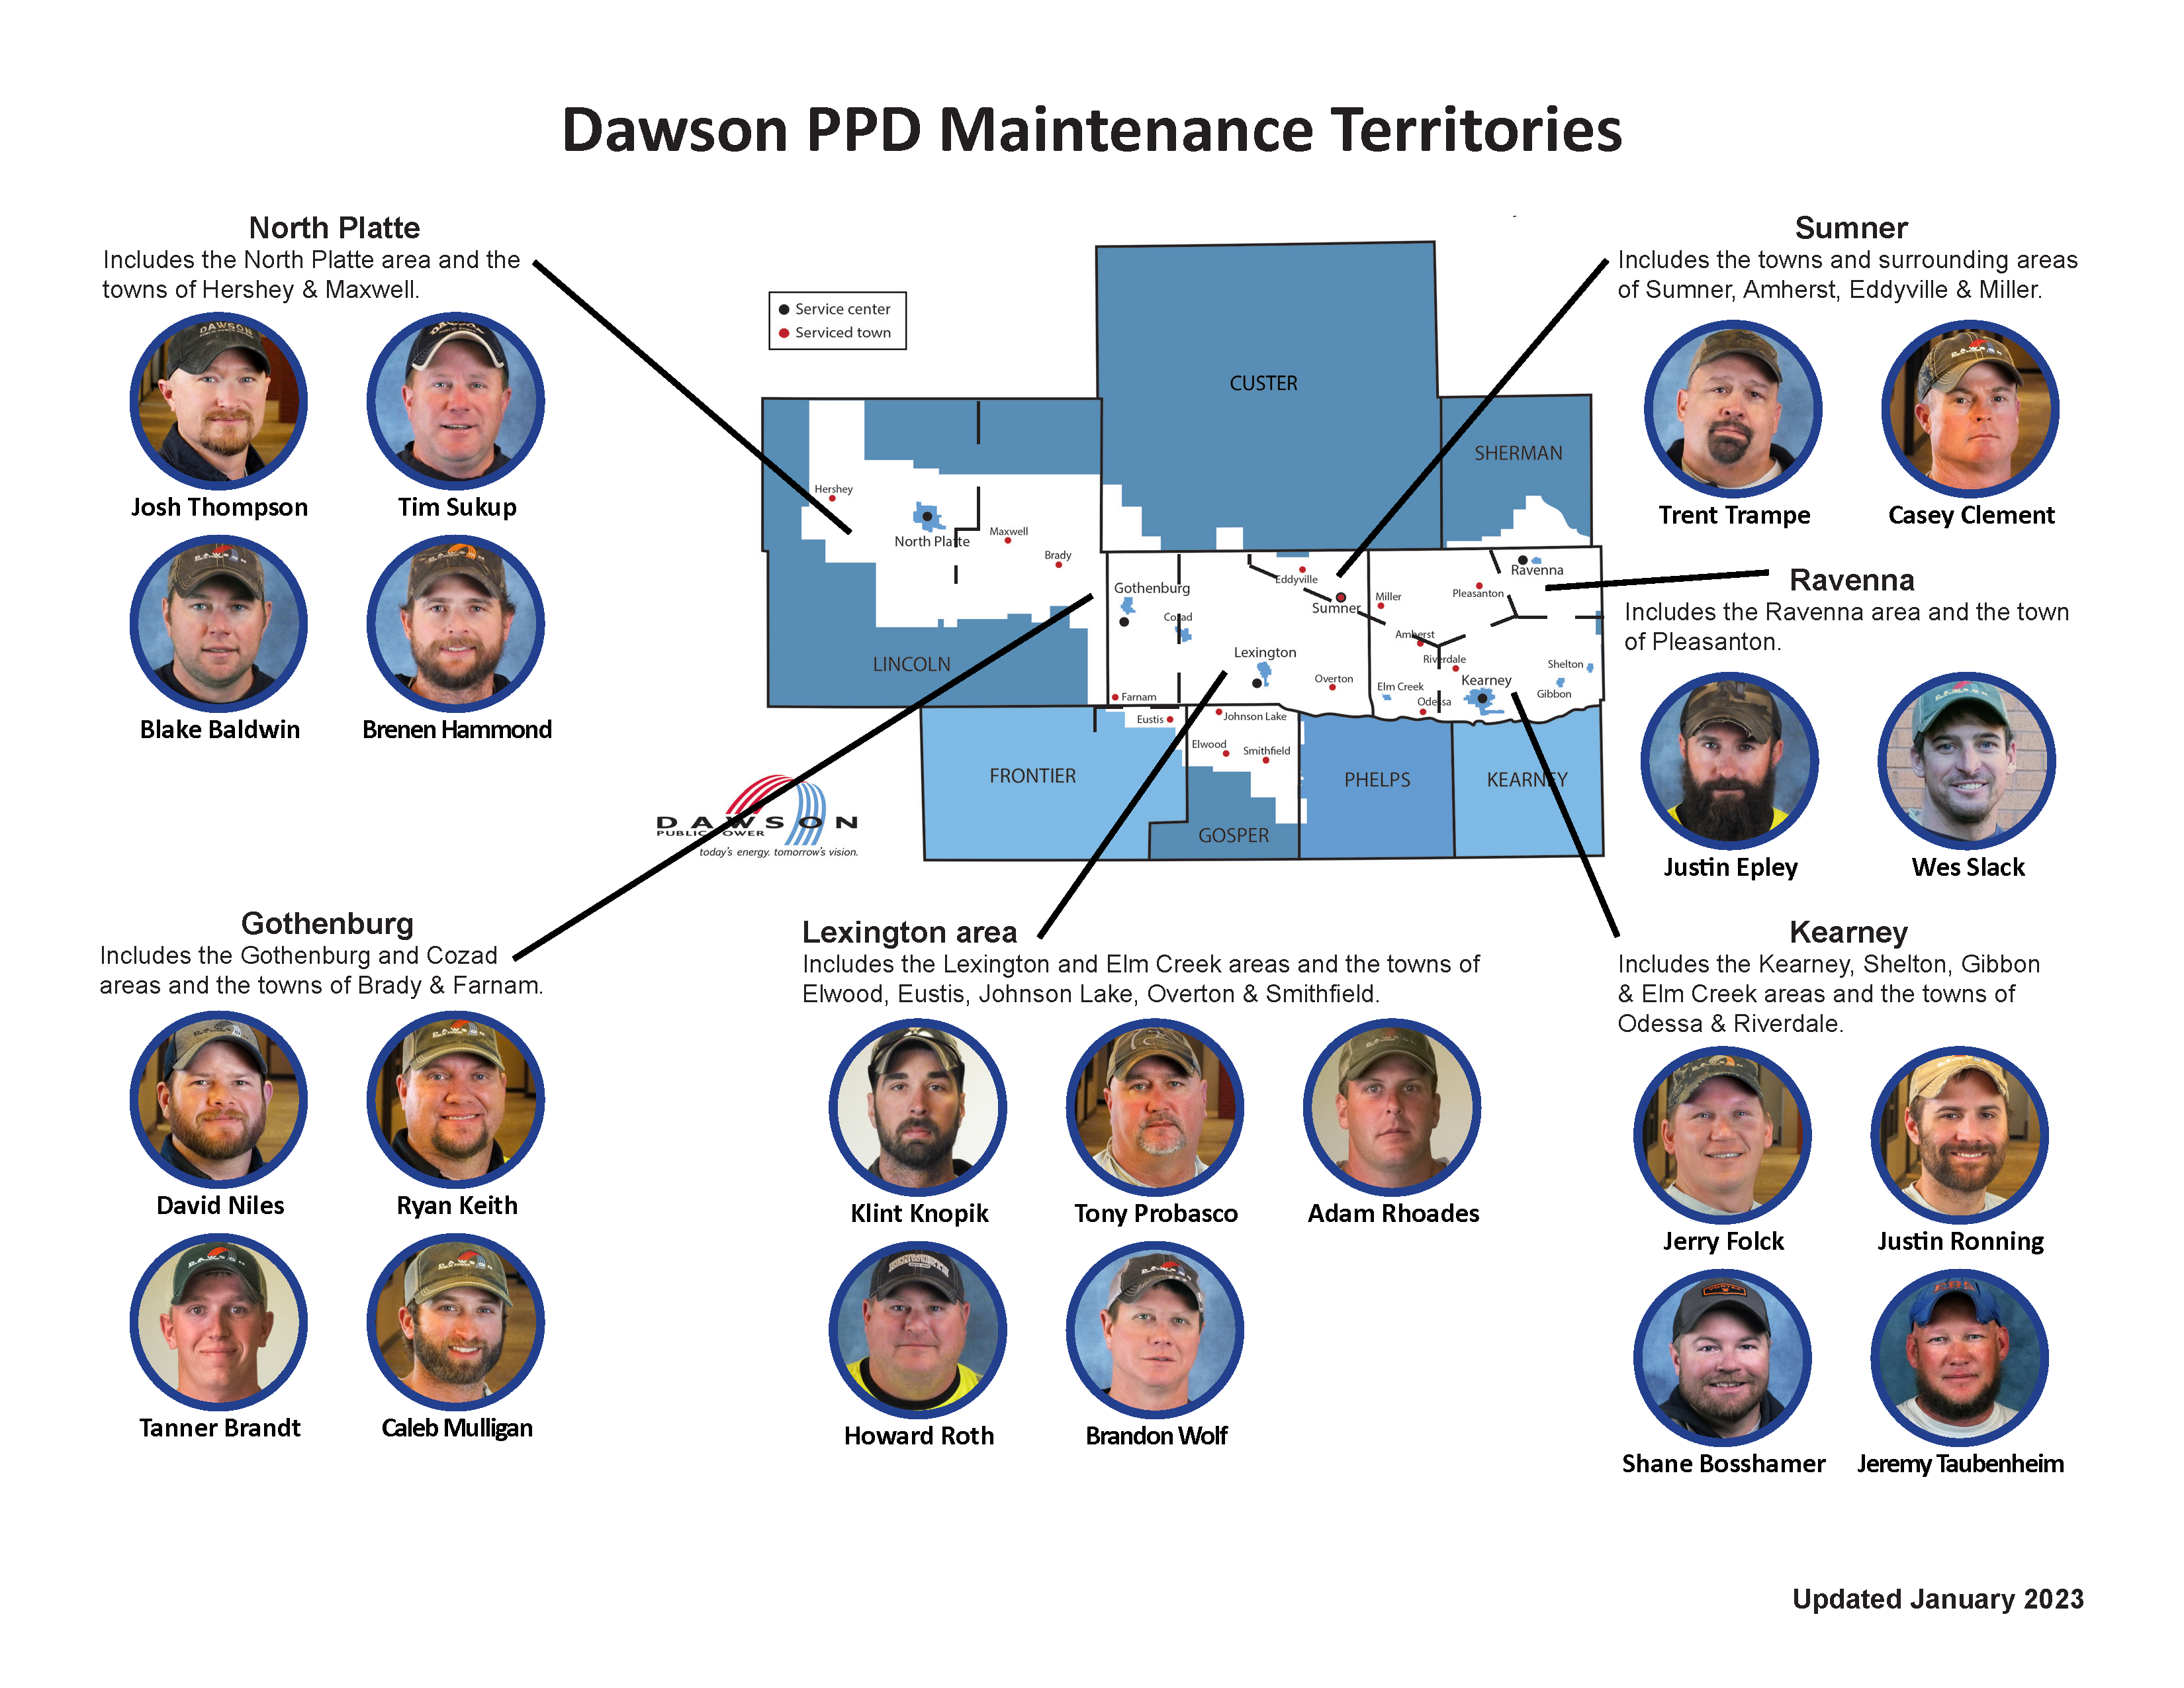 2023 Dawson PPD lineworker territory map